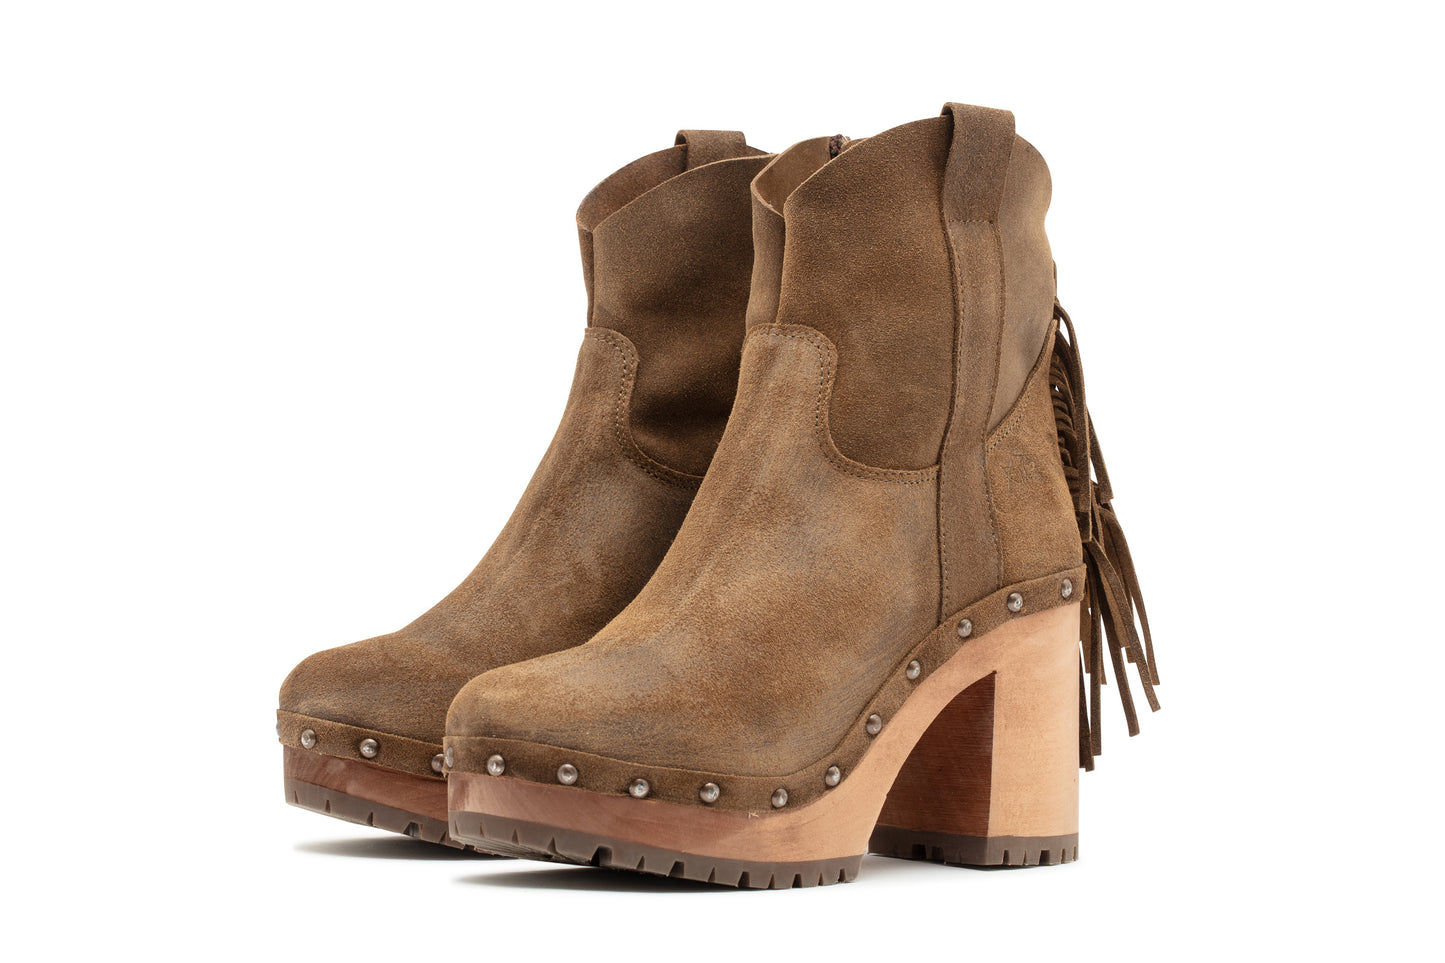 High heel boots with fringes